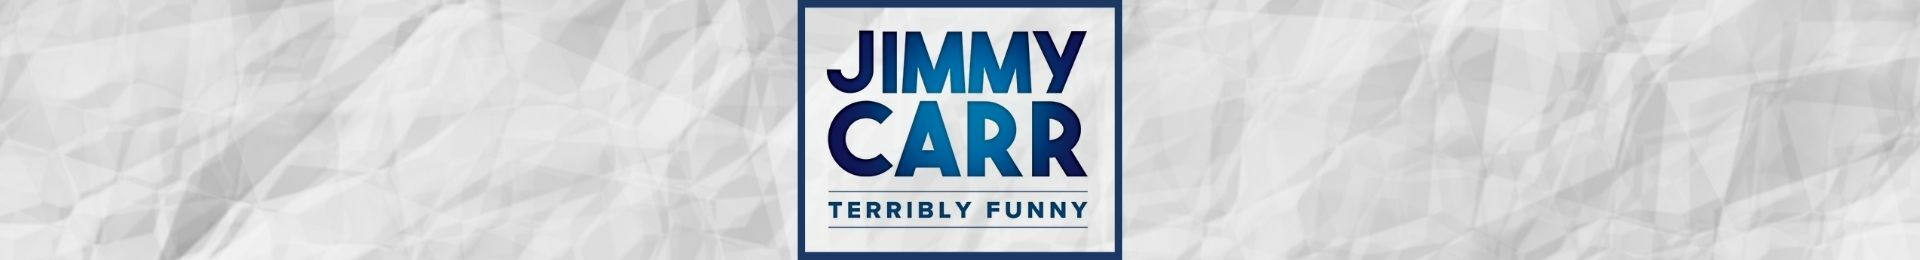 Jimmy Carr: Terribly Funny banner image